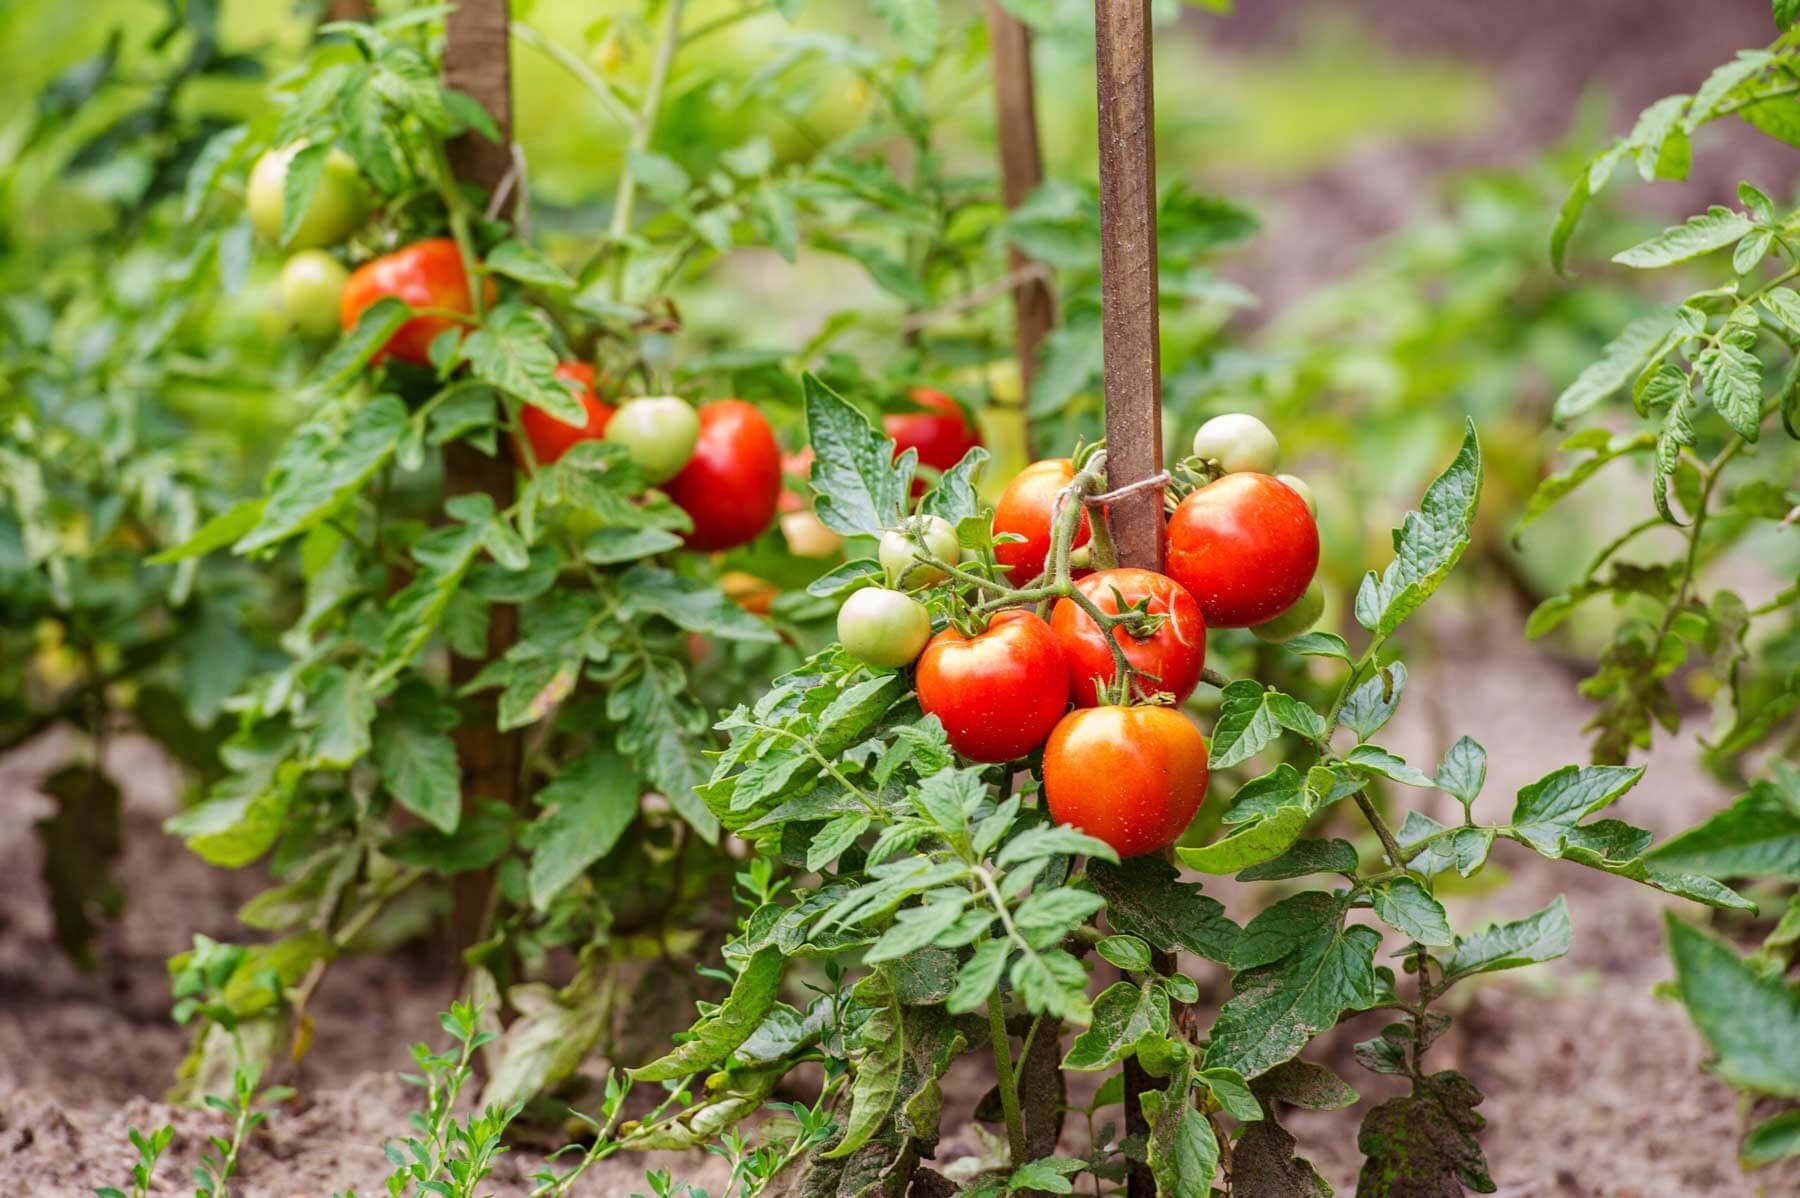 Crop Rotation: What To Plant After Tomatoes